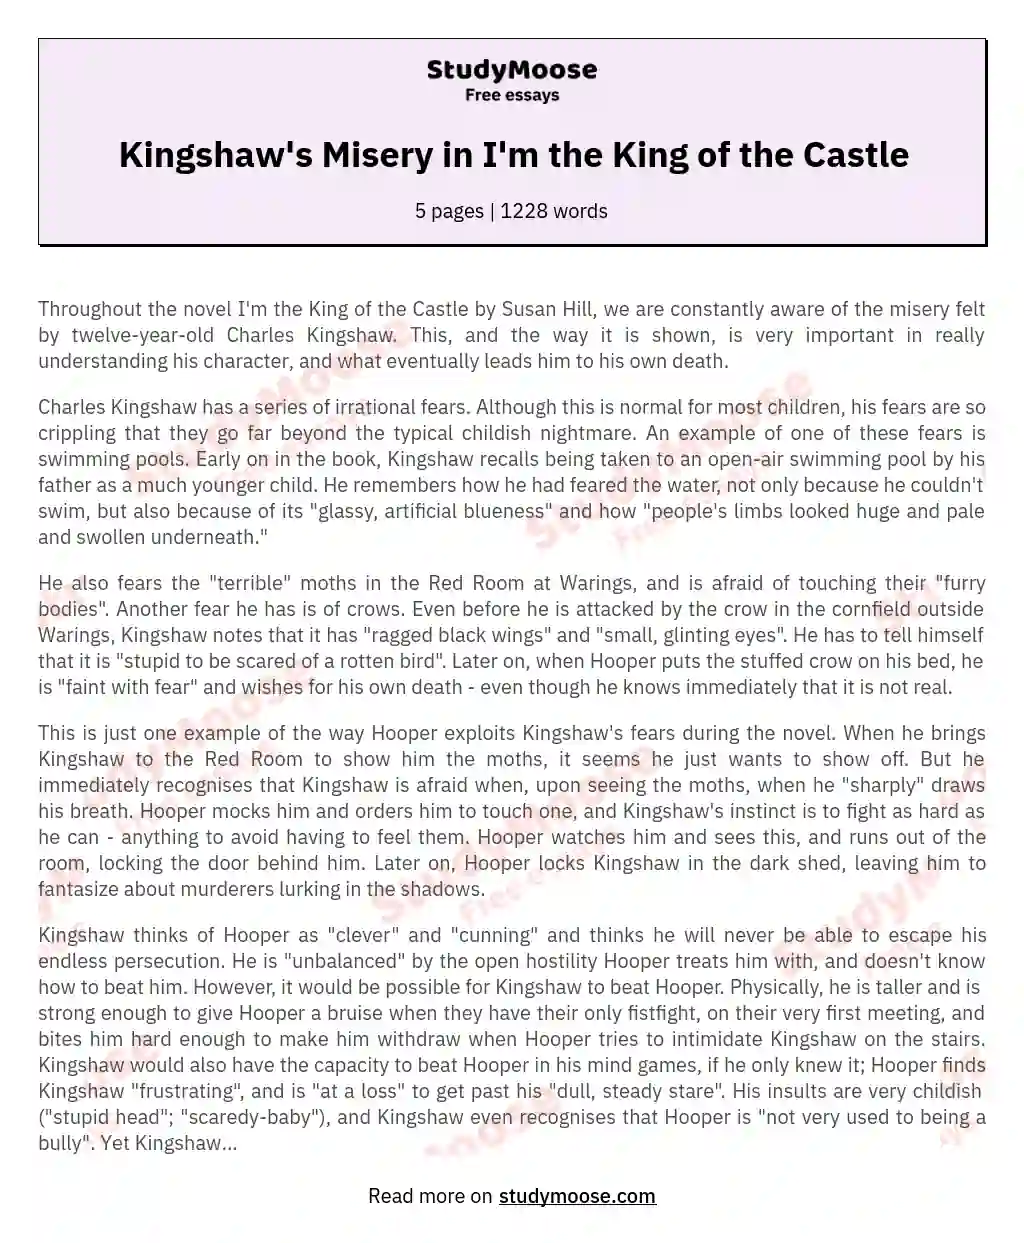 I,m The King Of The Castle by Susan Hill